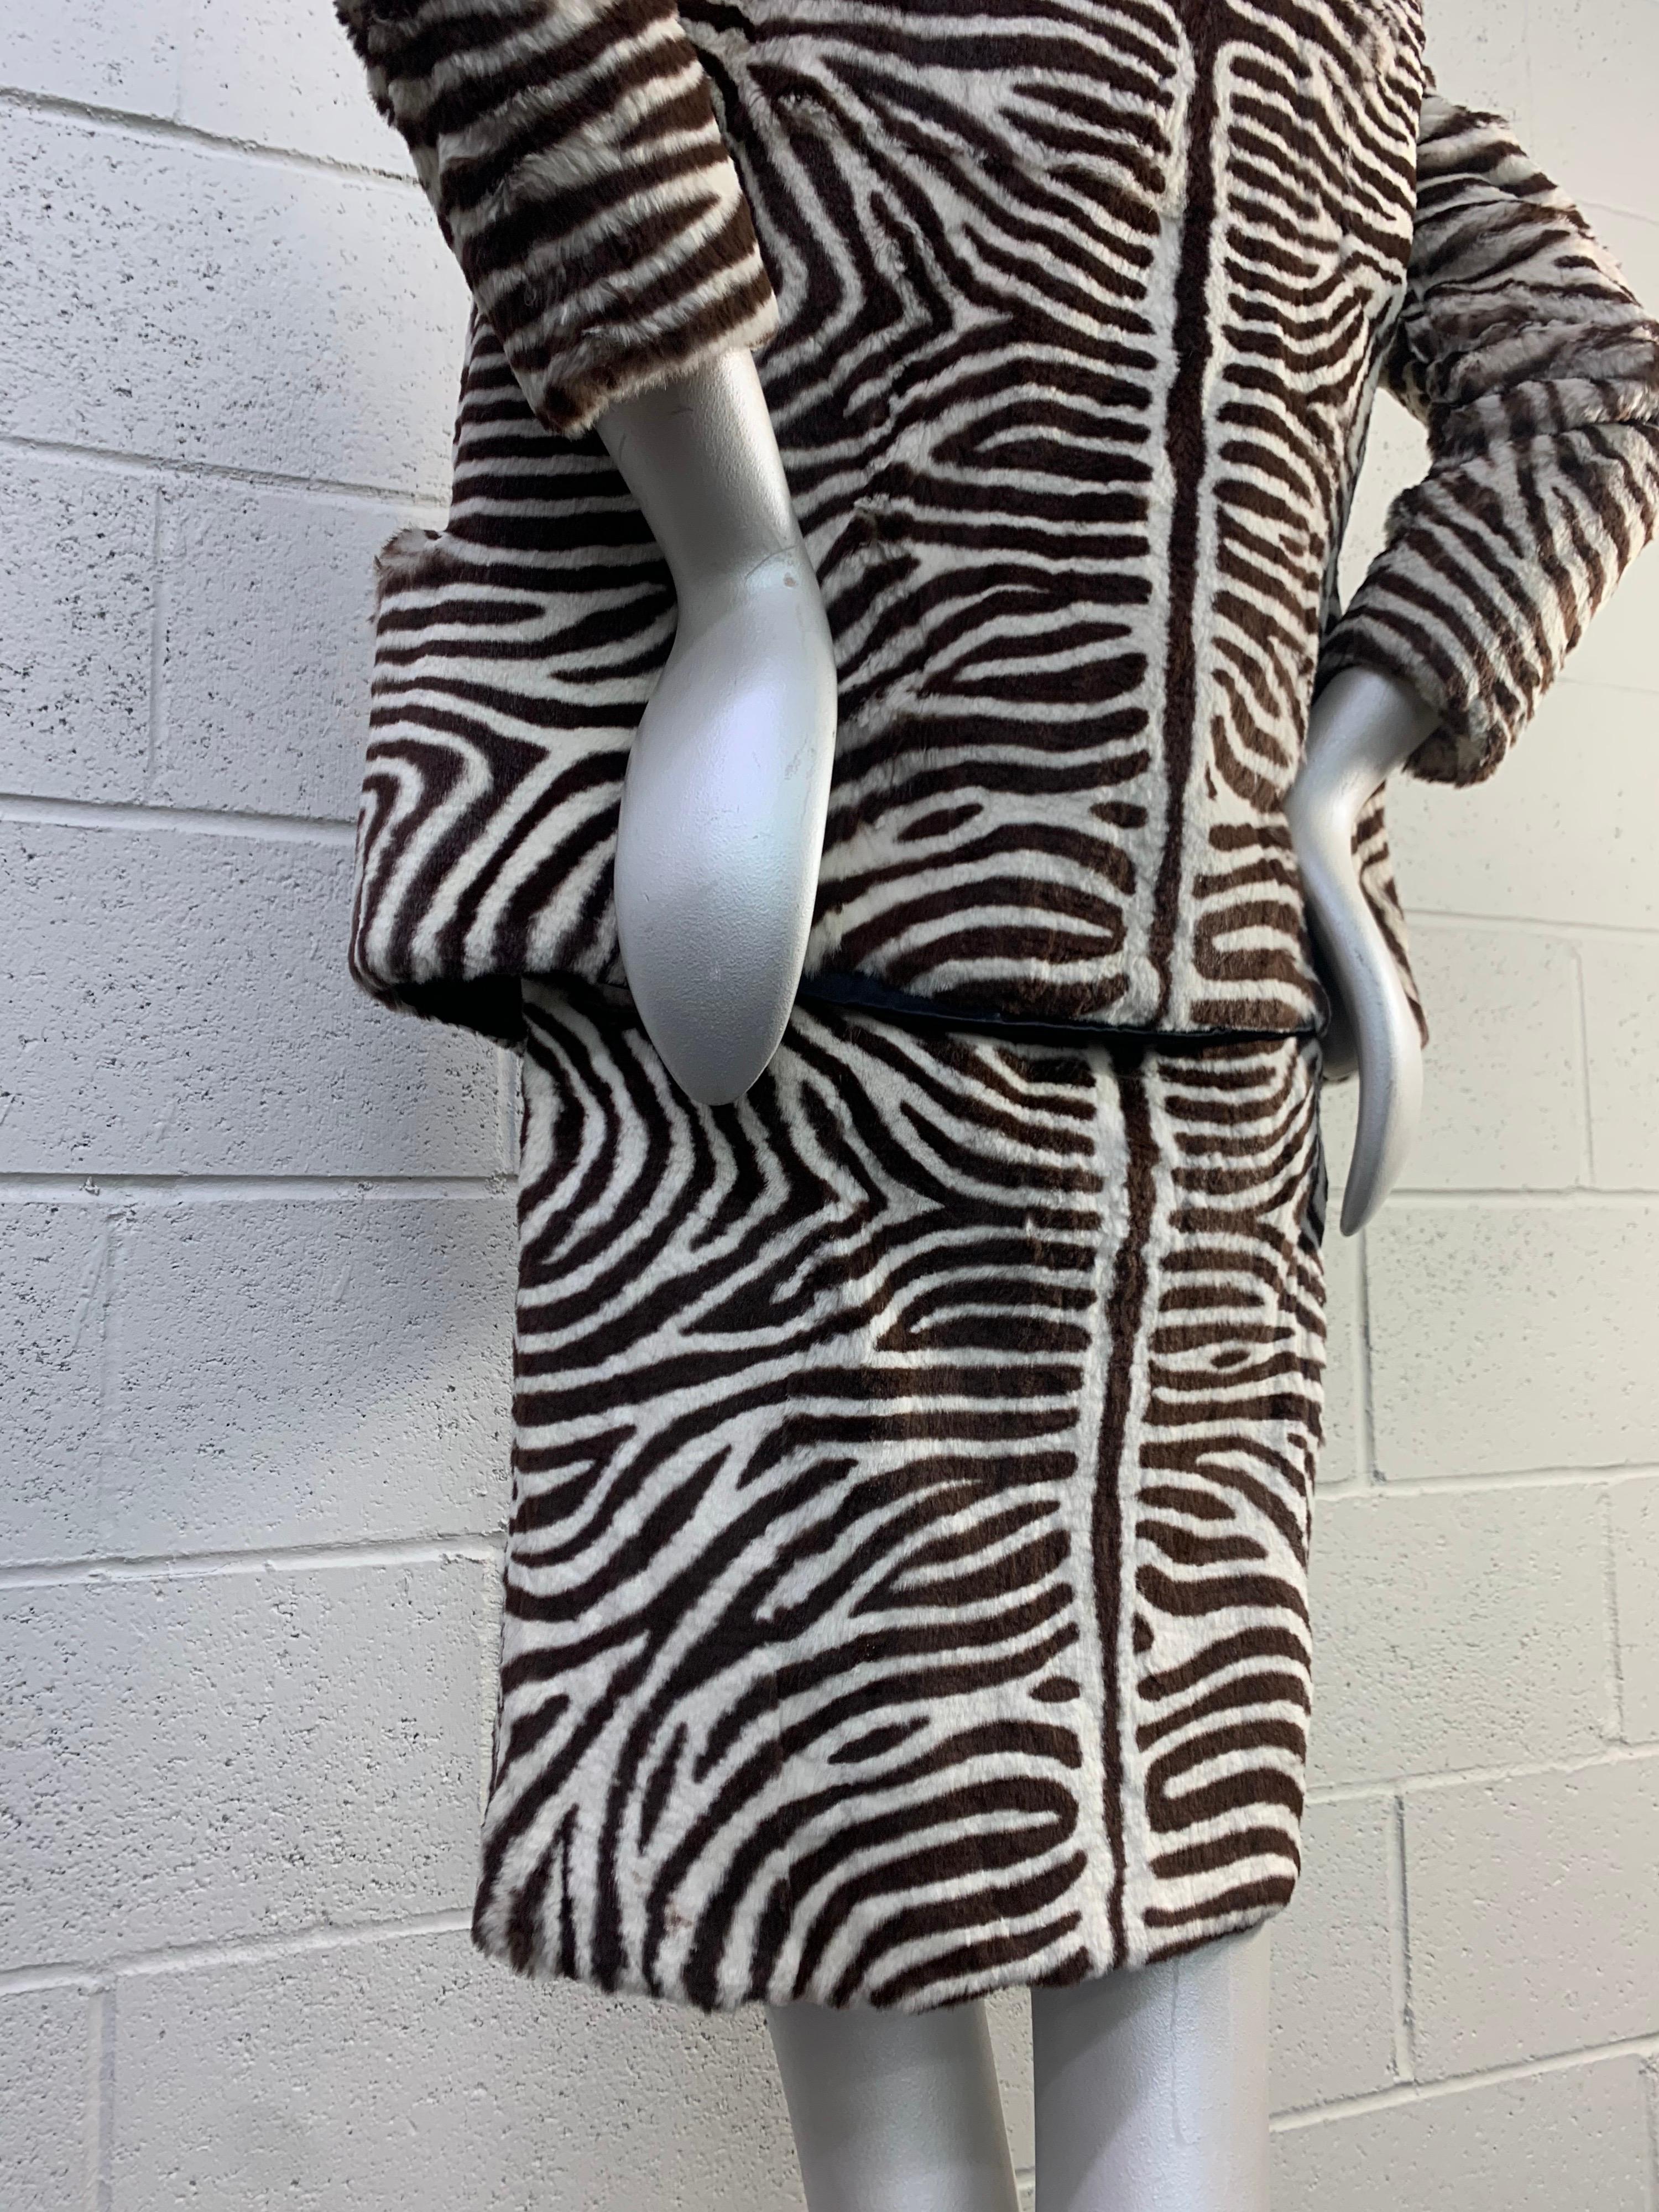 1960 Arthur Stevens Zebra Stenciled Lapin Mod Dress and Jacket Ensemble In Excellent Condition For Sale In Gresham, OR